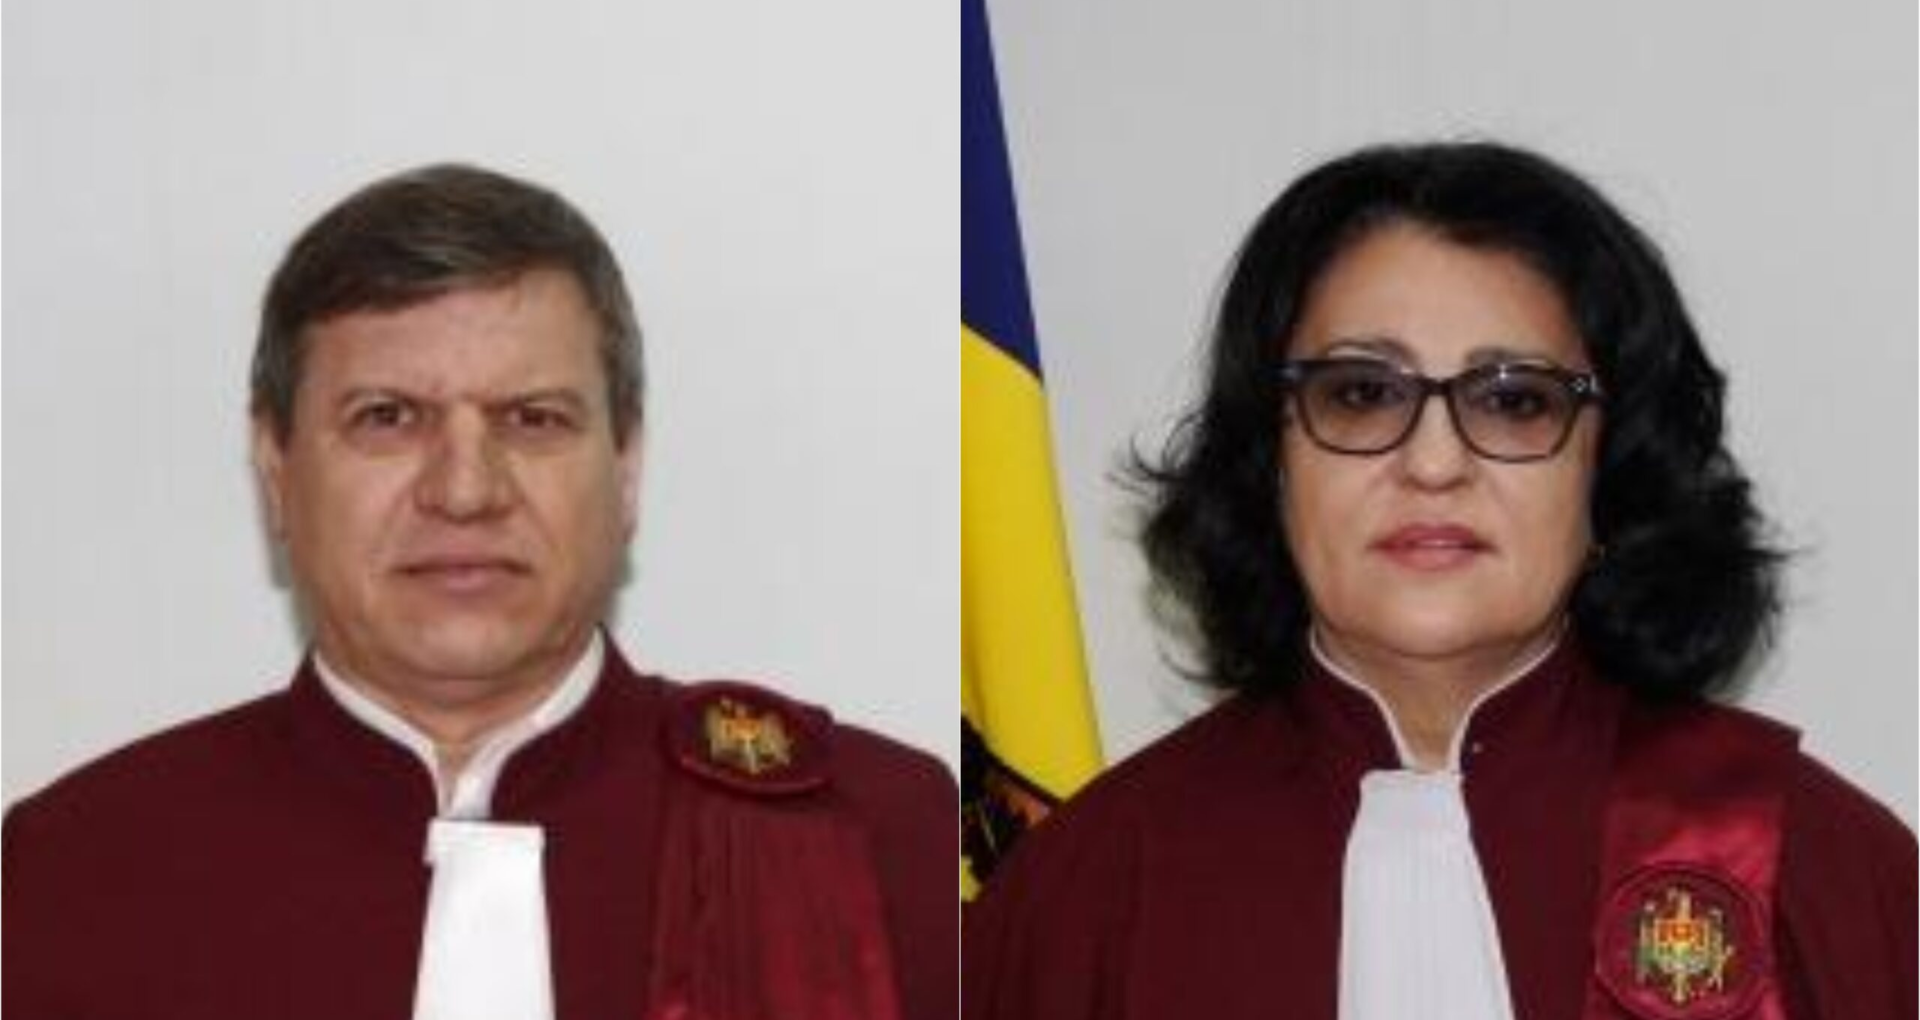 The motion of censure submitted by communists and socialists against the Gavrilița government failed